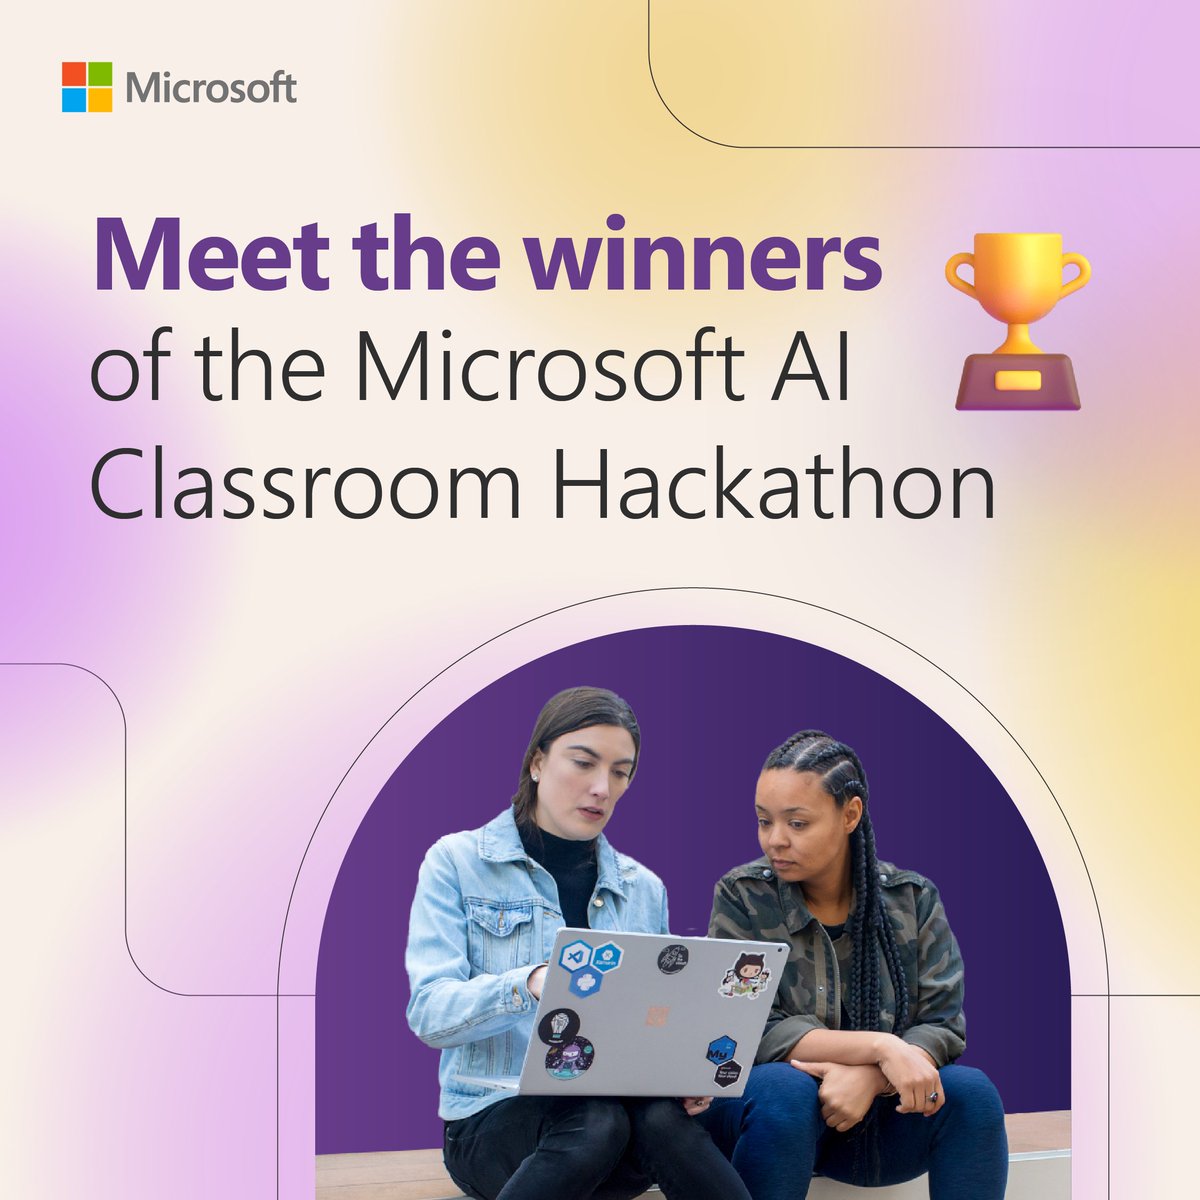 Congratulations to the Microsoft #AI Classroom Hackathon winners! 🎉🏆👏 We applaud their innovative projects and impressive collaboration. Get an in-depth look at their work: msft.it/6011YVcGv #MicrosoftEDU